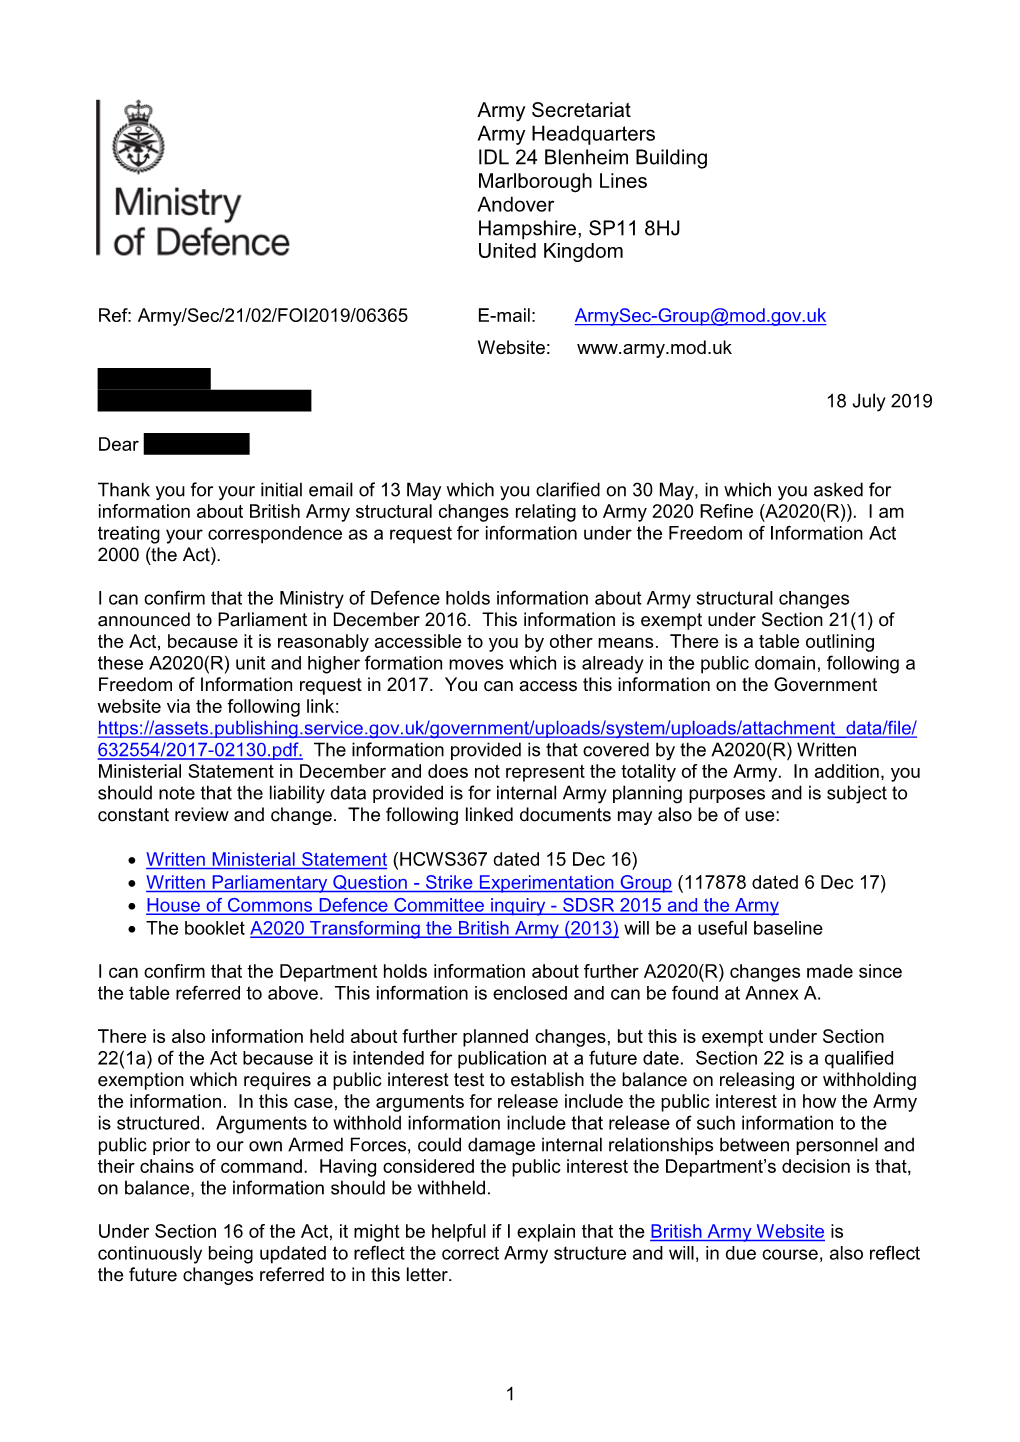 Information Regarding the British Army Structural Changes Relating to Army